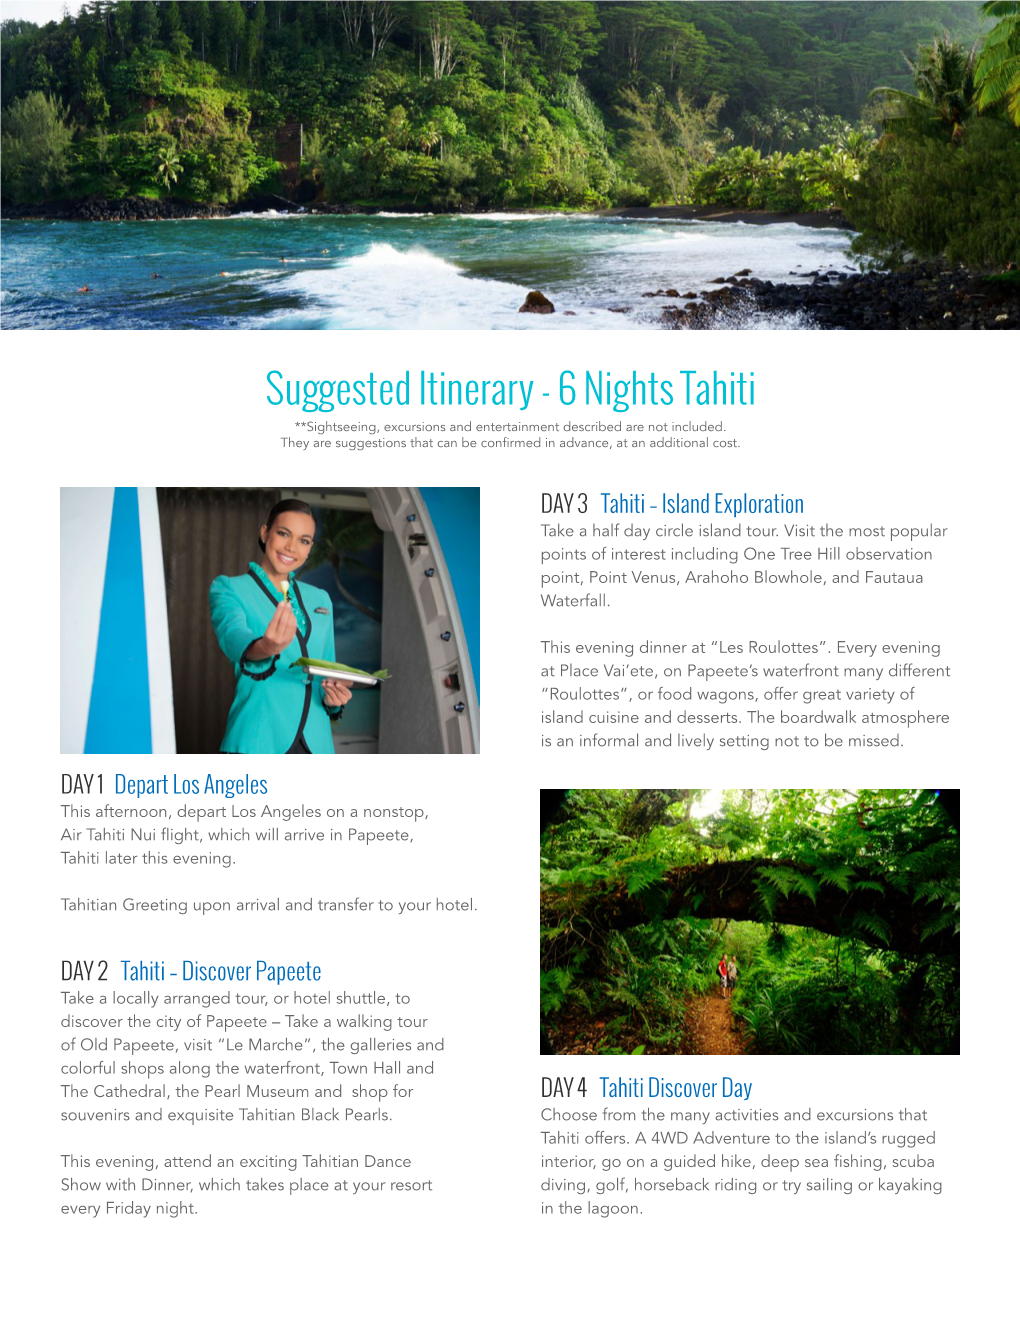 Suggested Itinerary - 6 Nights Tahiti **Sightseeing, Excursions and Entertainment Described Are Not Included